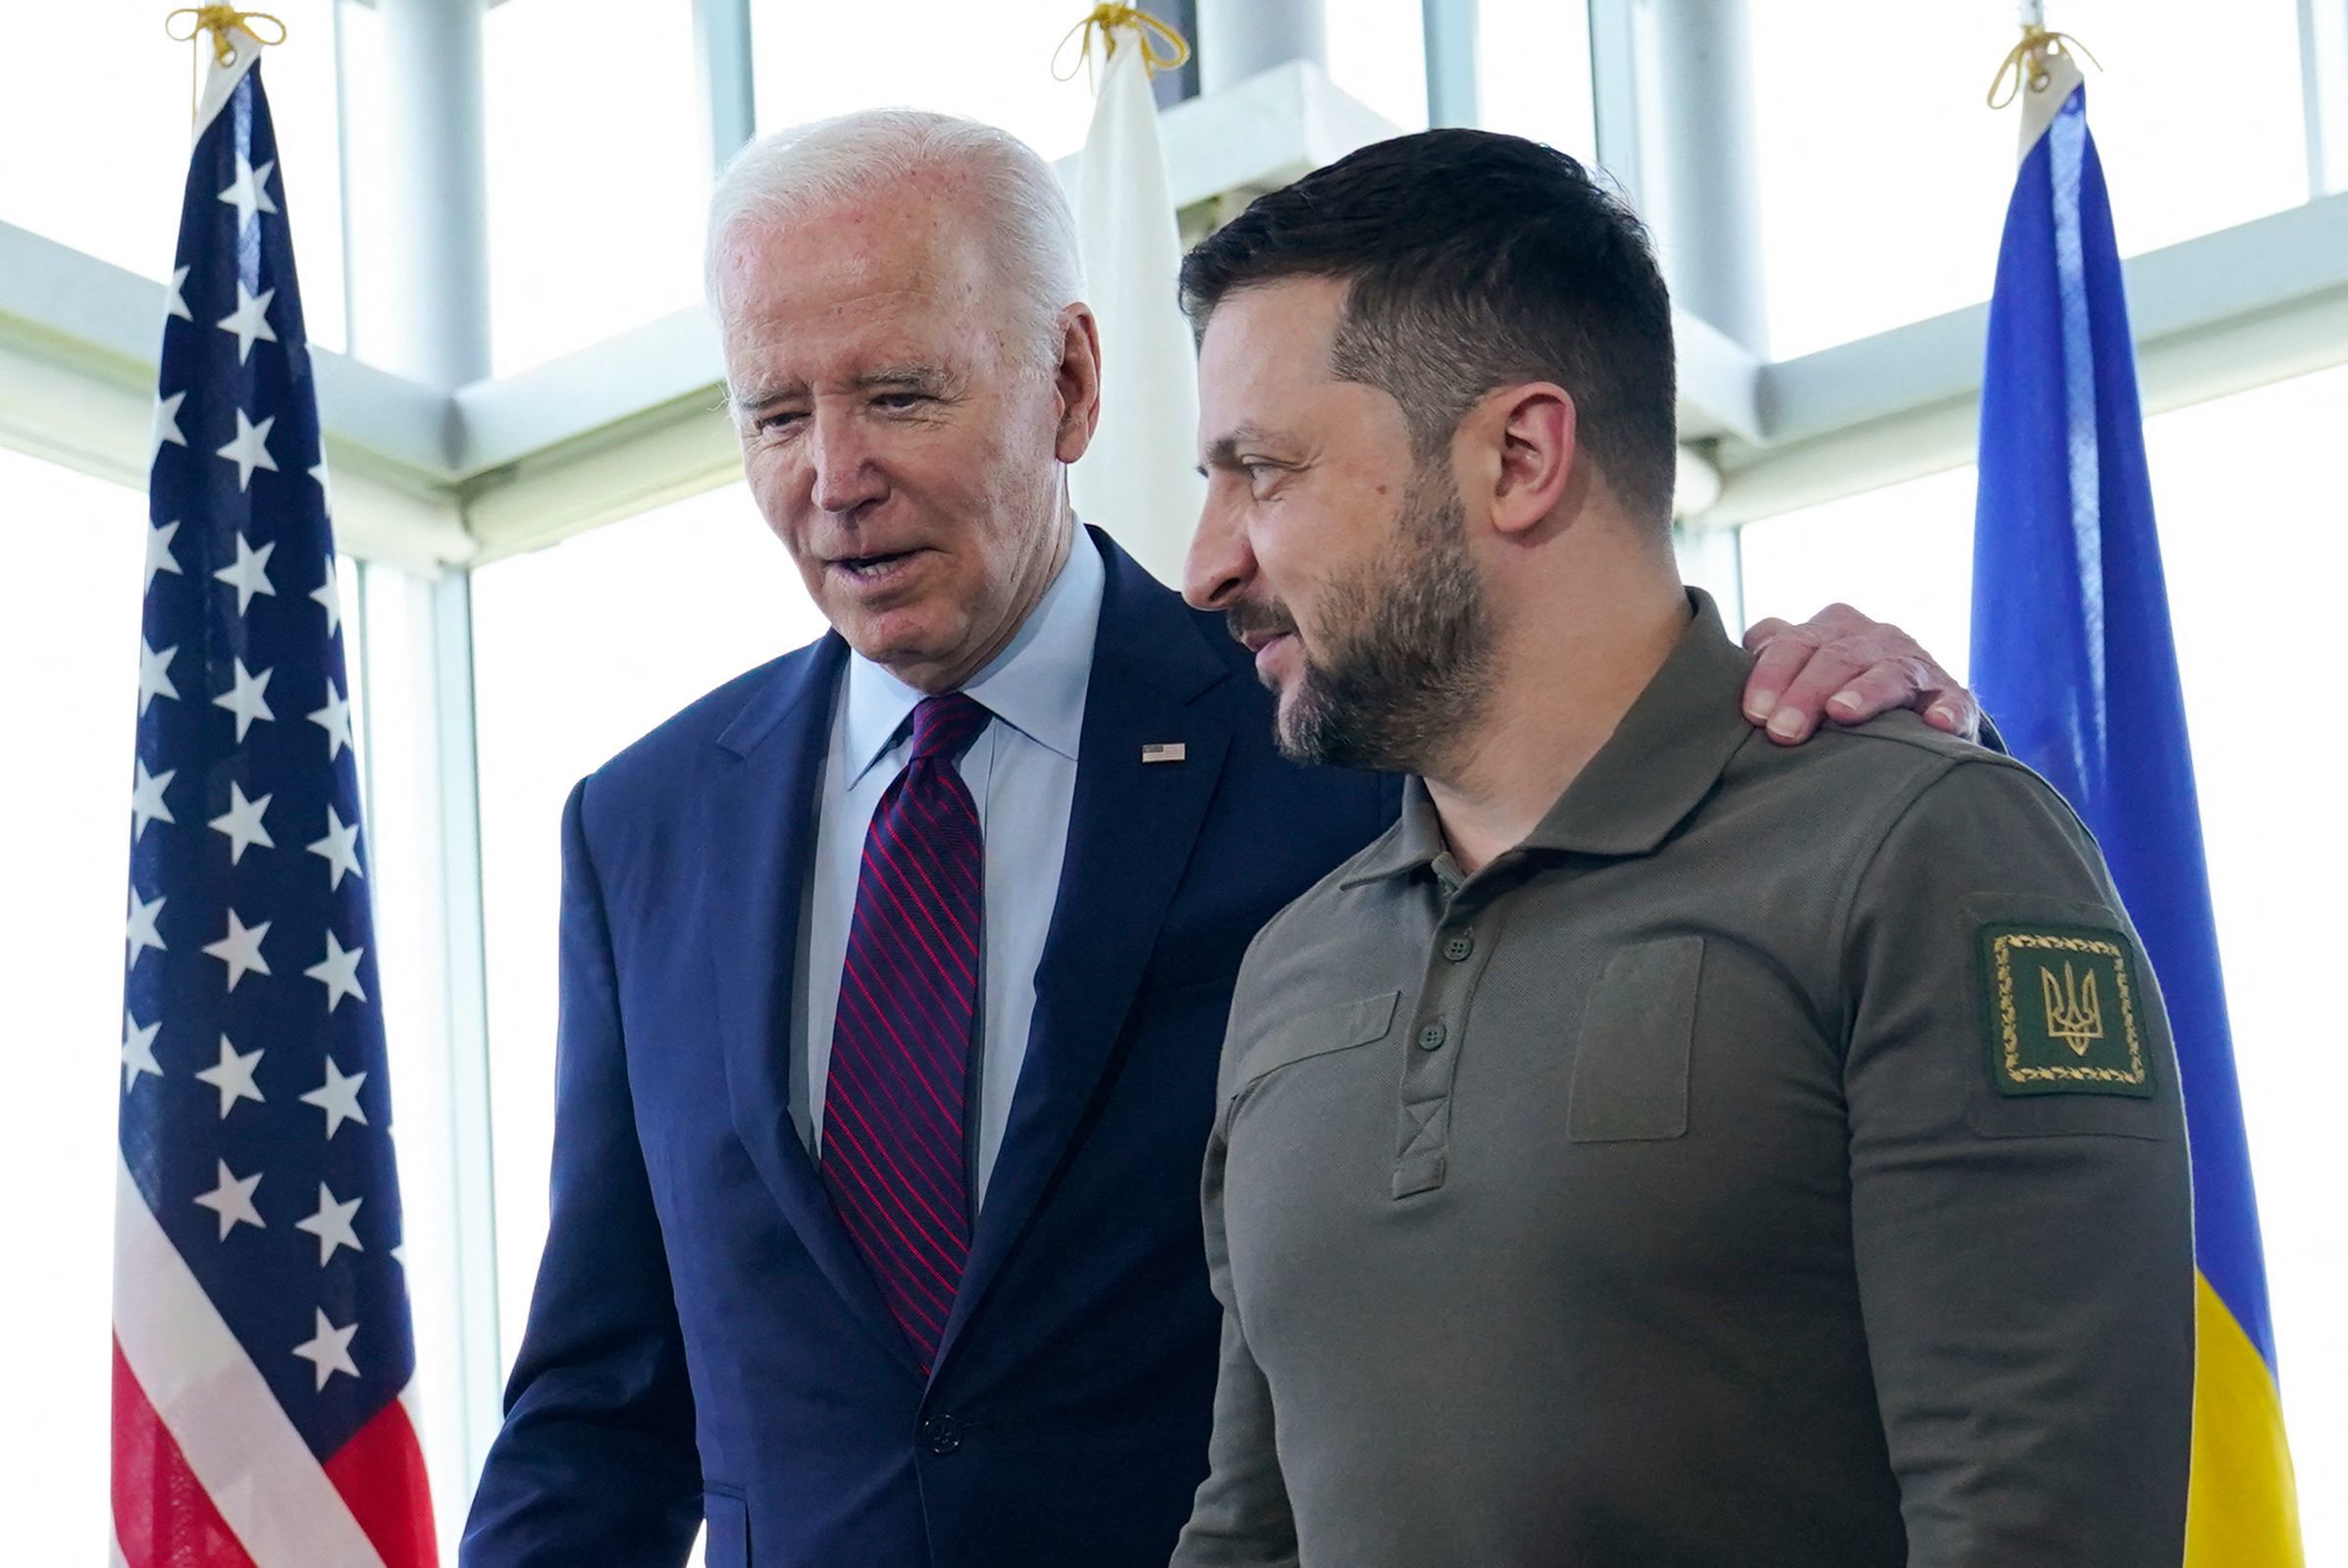 TOPSHOT - US President Joe Biden (L) walks with Ukraine's President Volodymyr  lt;HIT gt;Zelensky lt;/HIT gt; ahead of a working session on Ukraine during the G7 Leaders' Summit in Hiroshima on May 21, 2023. (Photo by Susan Walsh / POOL / AFP)